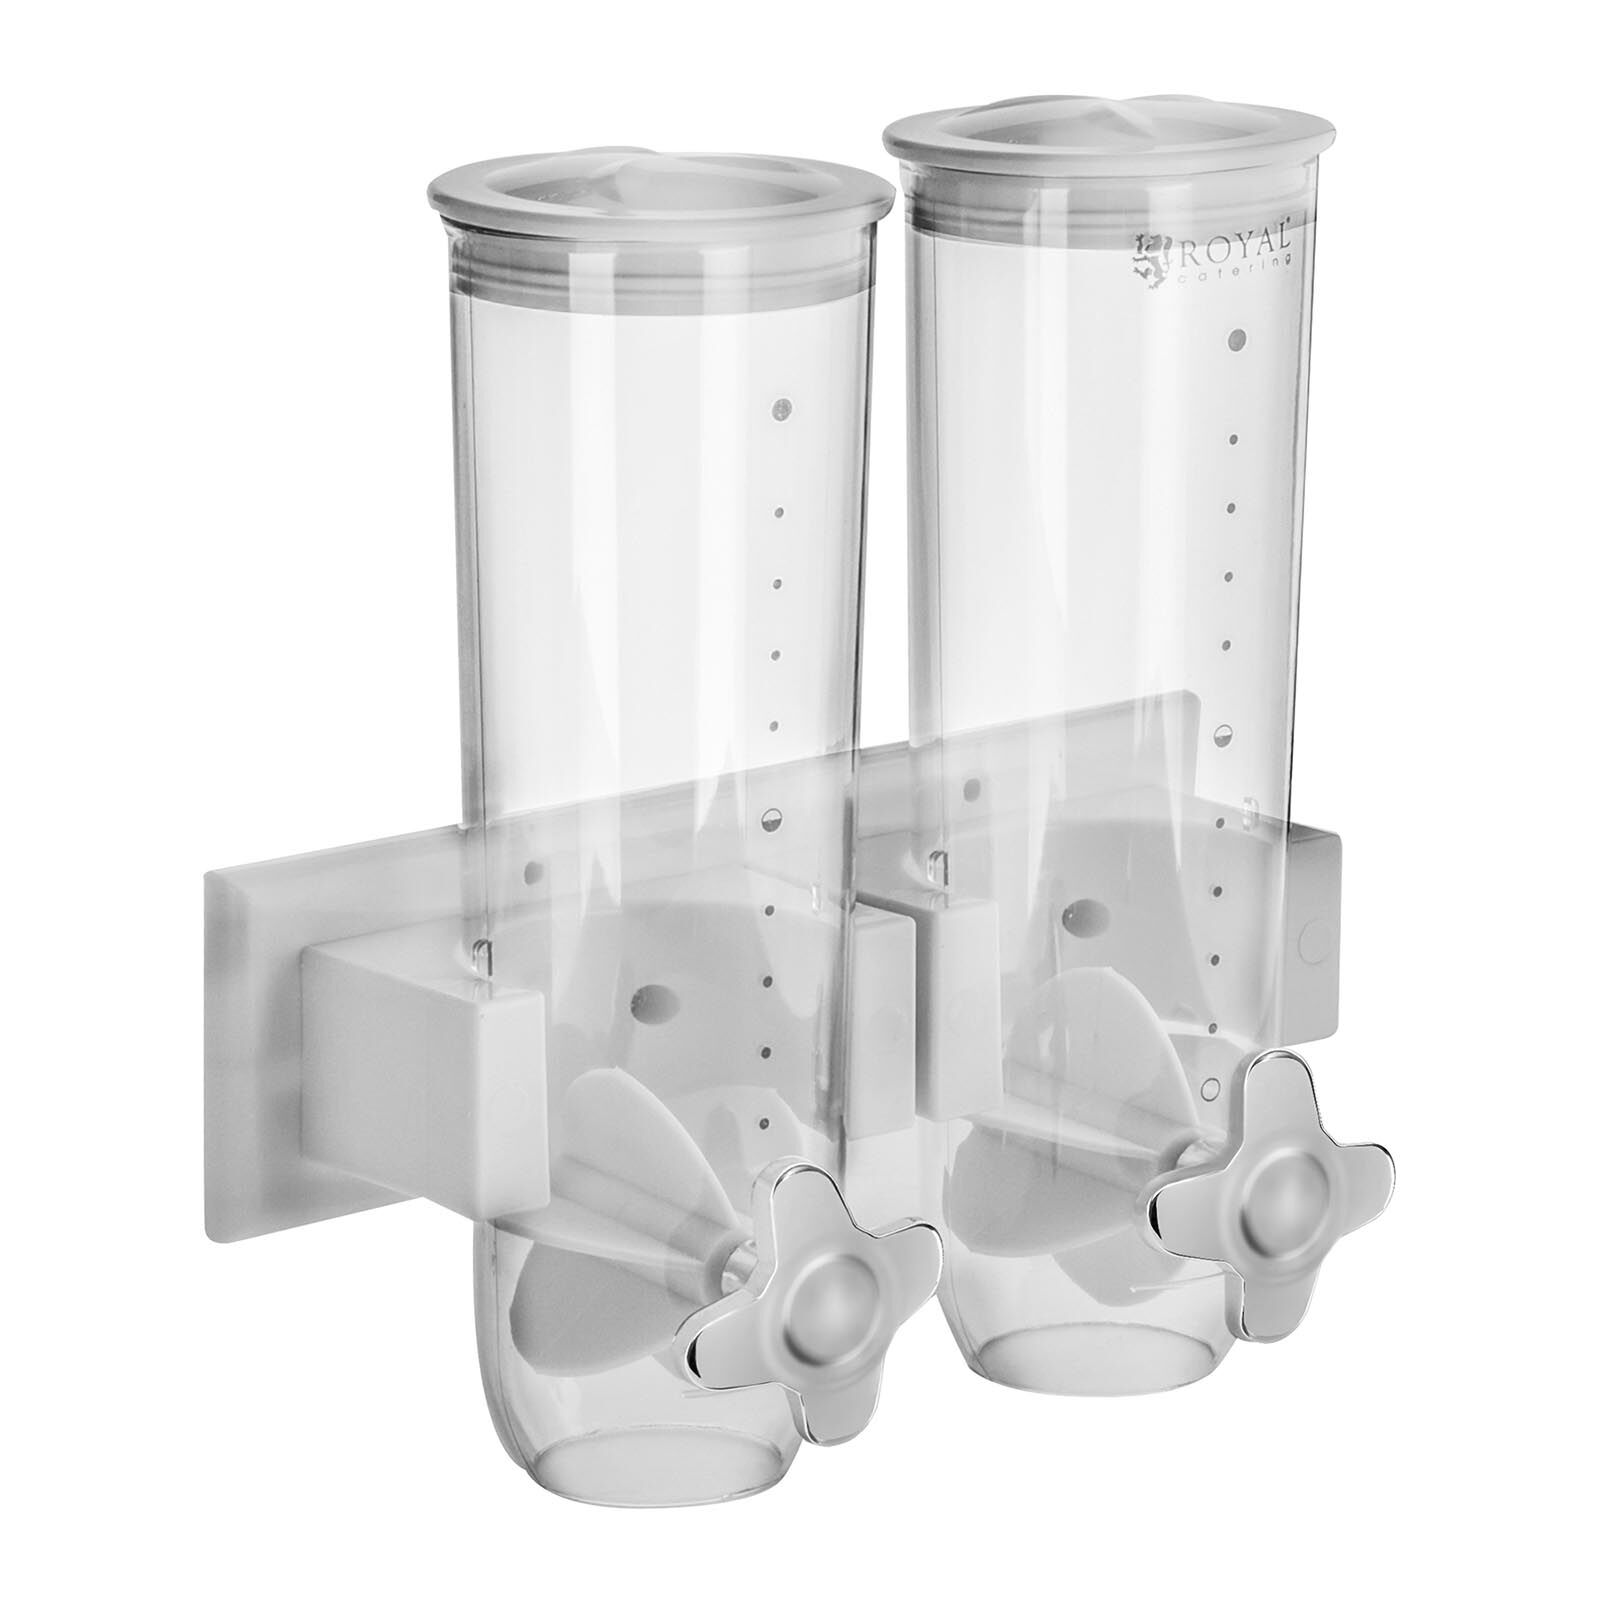 Royal Catering Cereal Dispenser 3 L - 2 containers RCCS-3L/2W